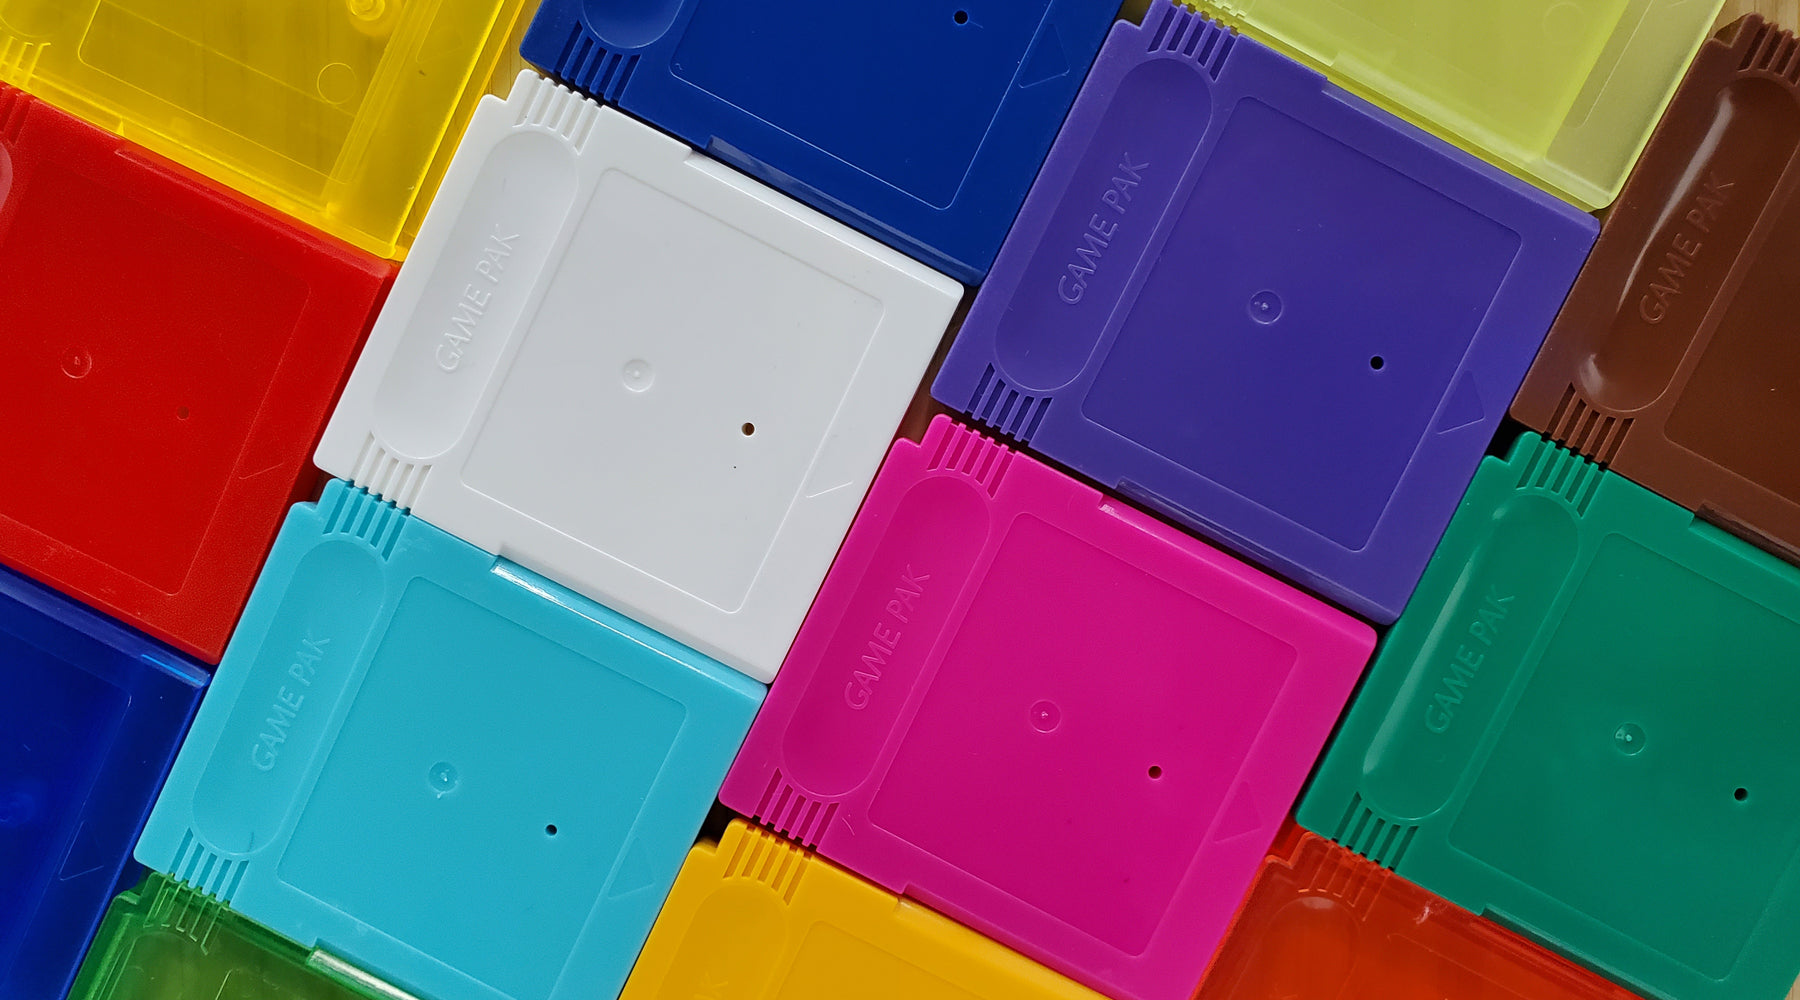 Here's a cartridge-free version of 'Pokémon Crystal' for the Analogue Pocket